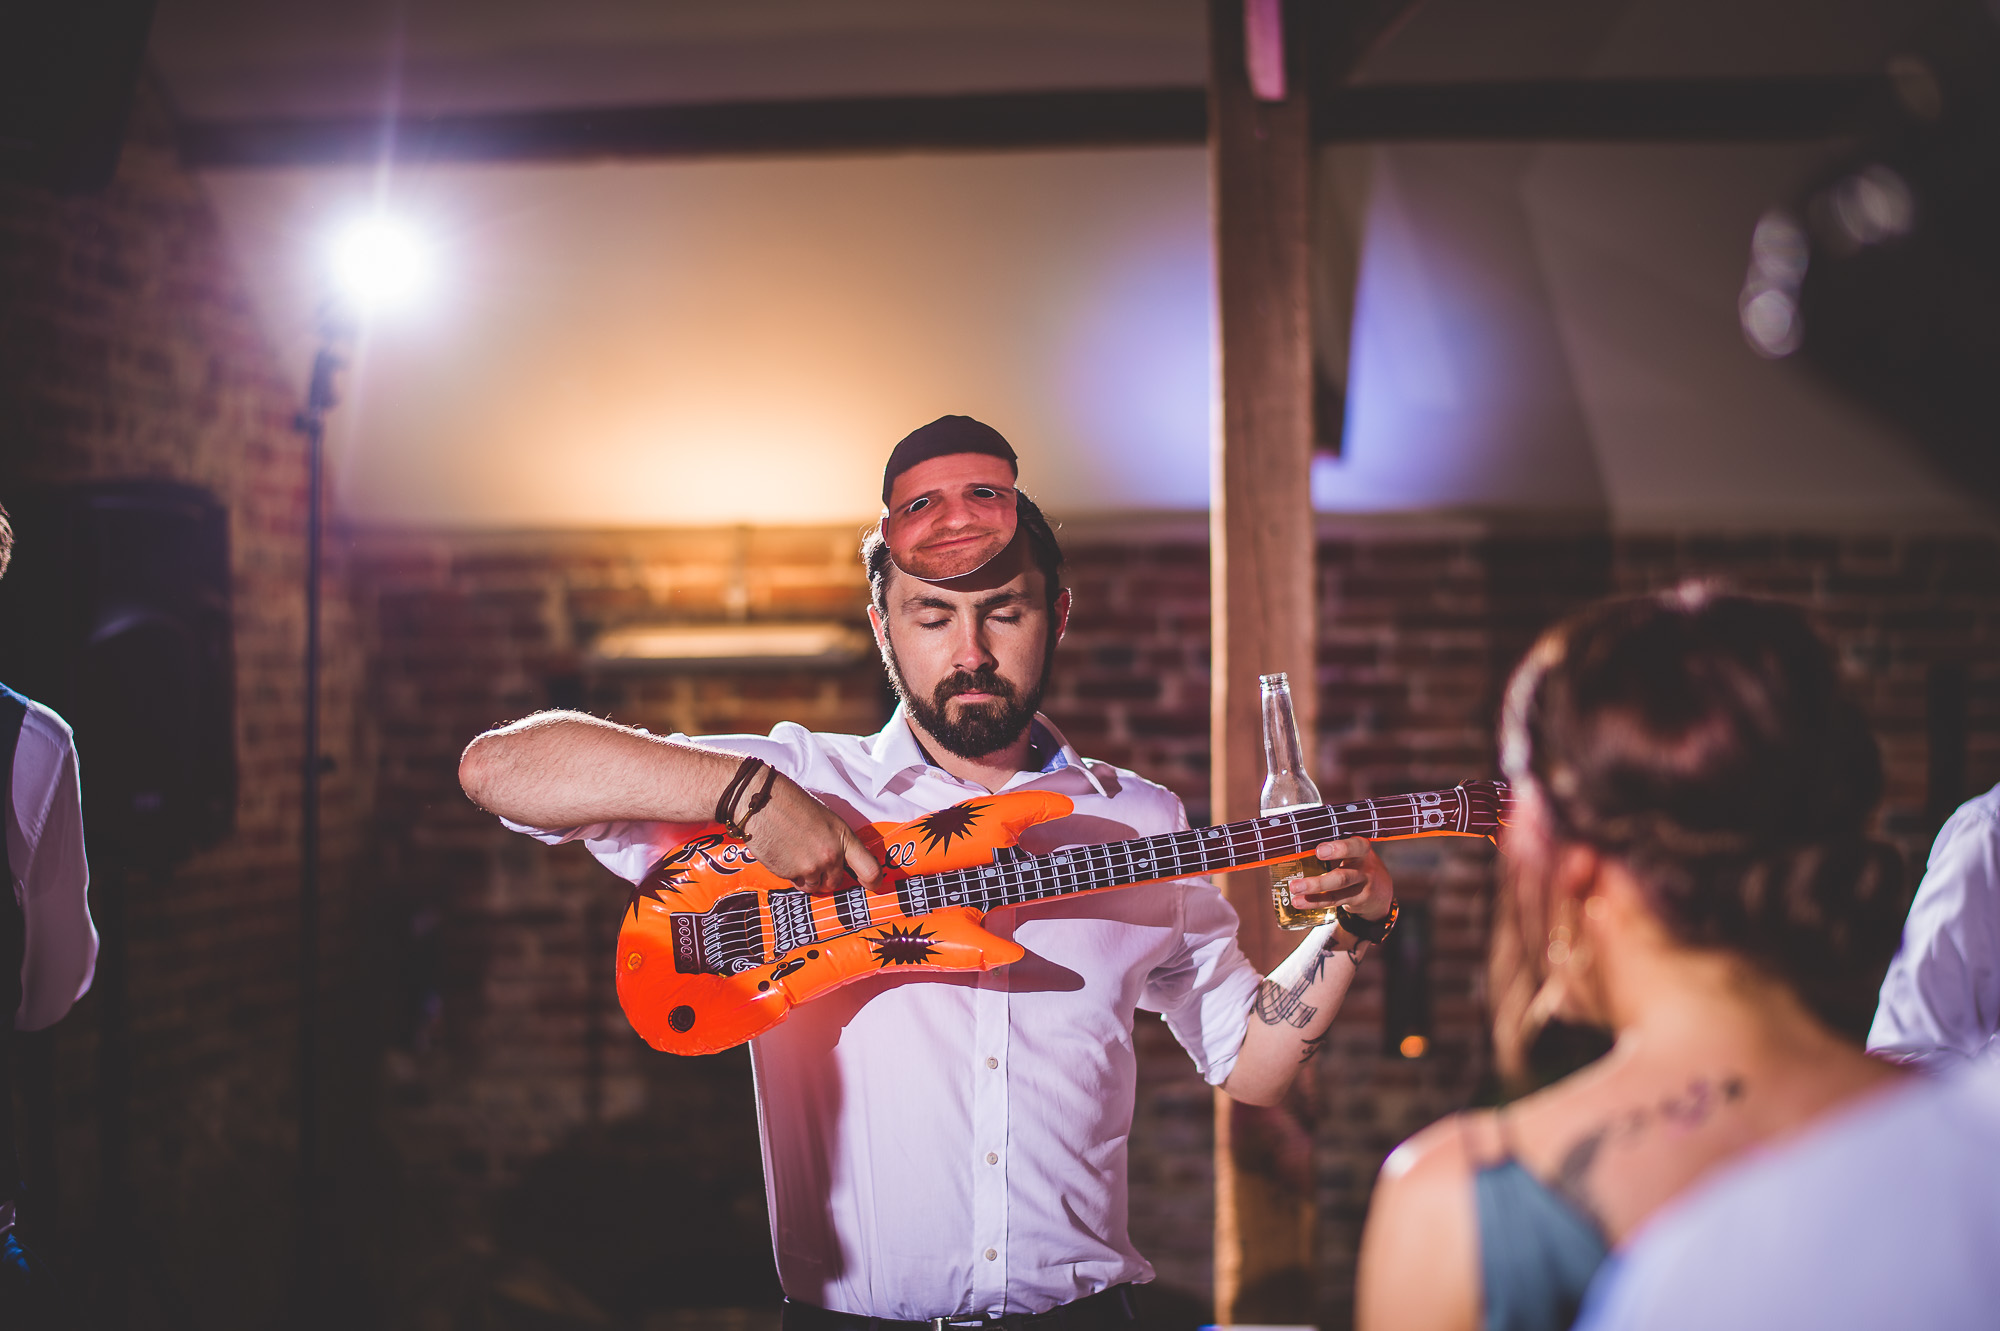 A groom playing a guitar at his wedding.